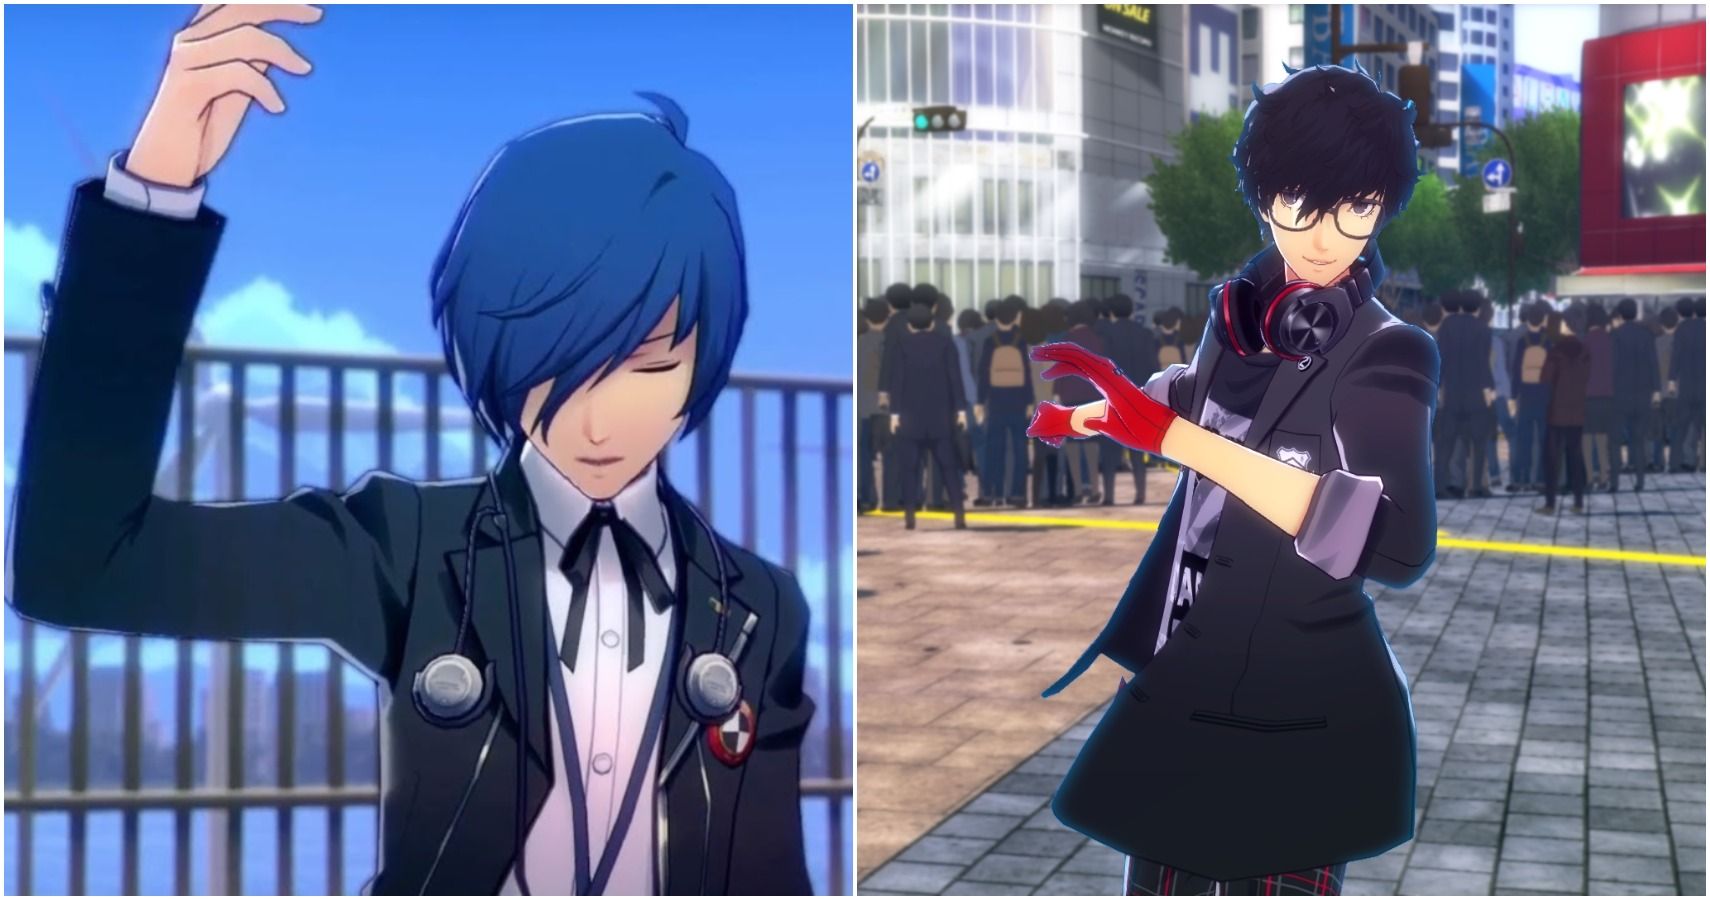 play persona 3 on ps4